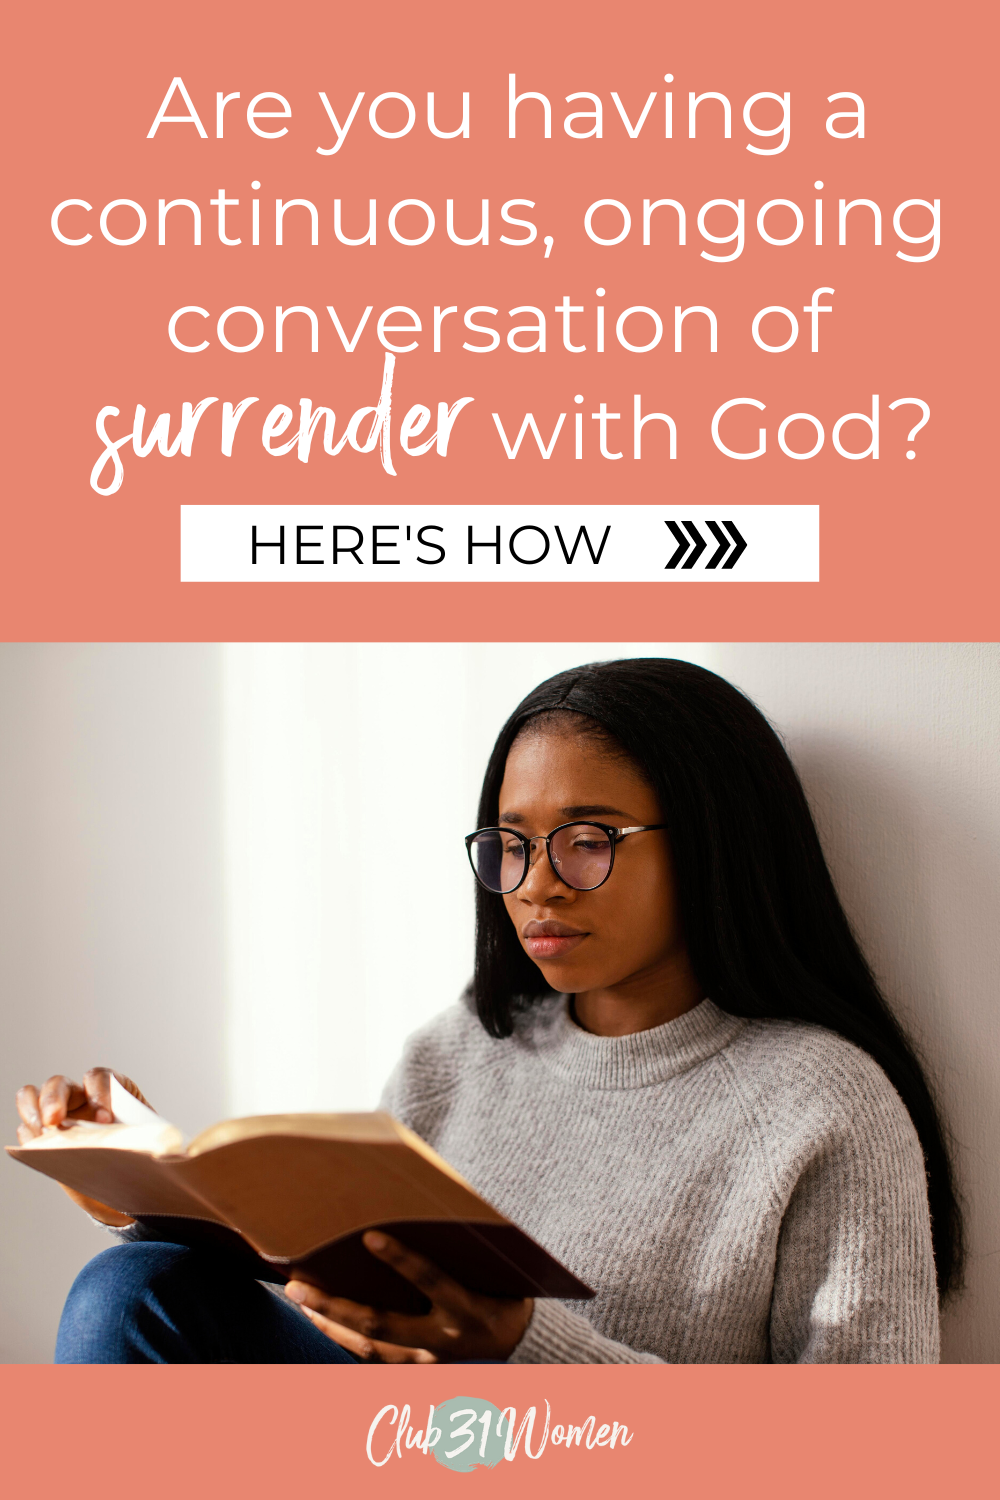 Are you feeling stressed and stretched in a season that is busy? Learn how you can live out a forward-paced faith during a season that is fast-paced. via @Club31Women